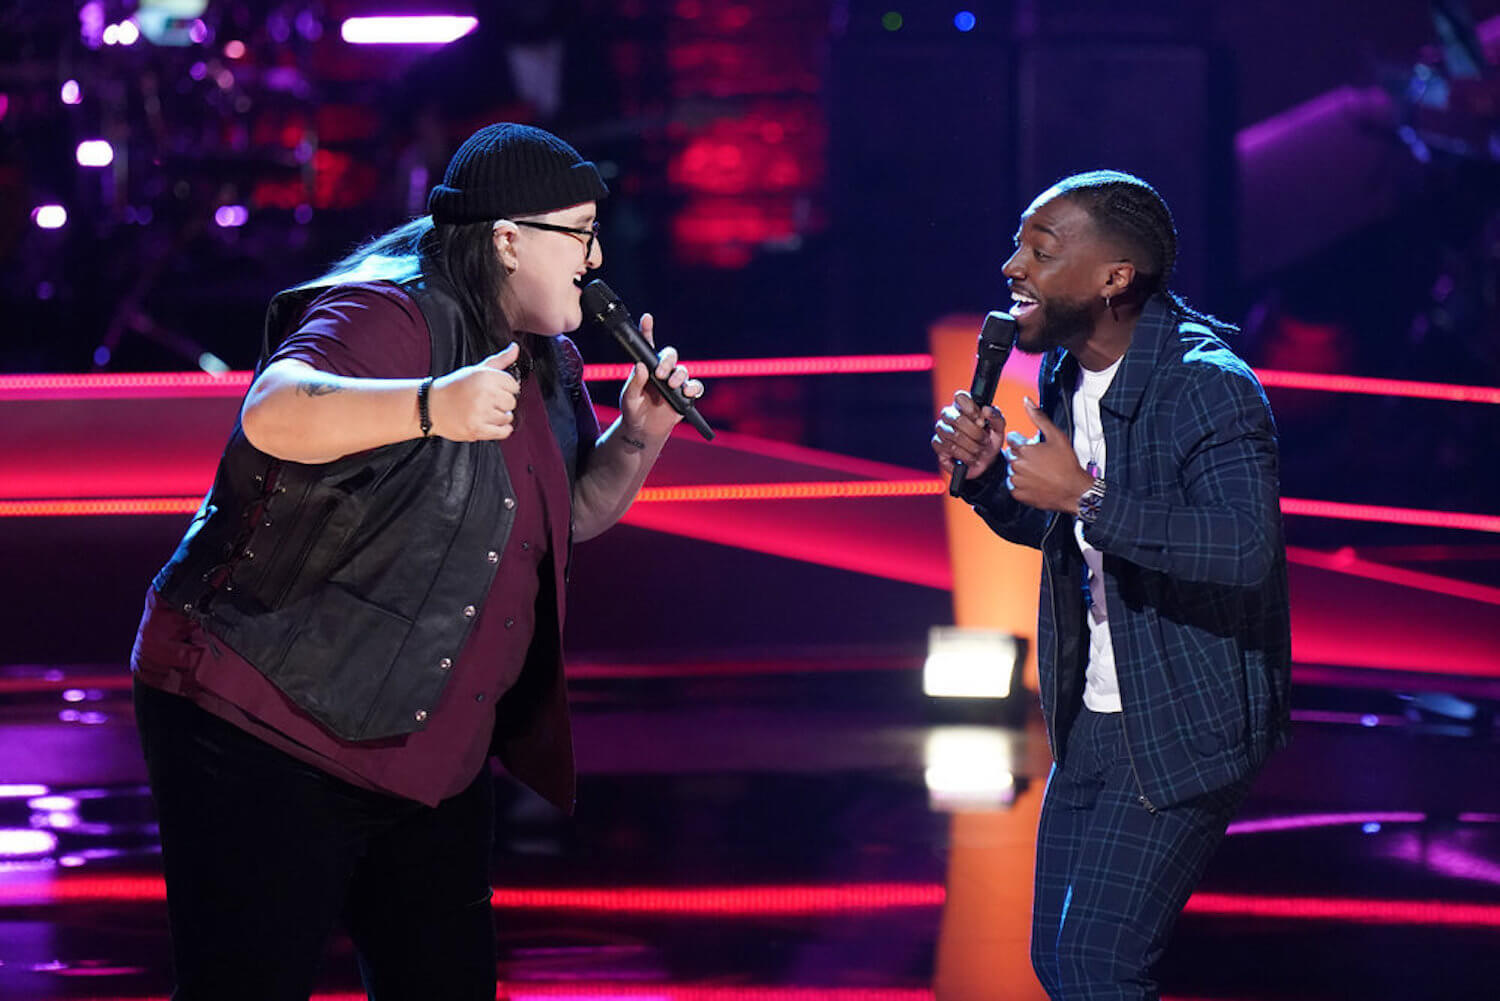 ALI and D. Smooth singing toward each other on stage in 'The Voice' Season 23 battle rounds